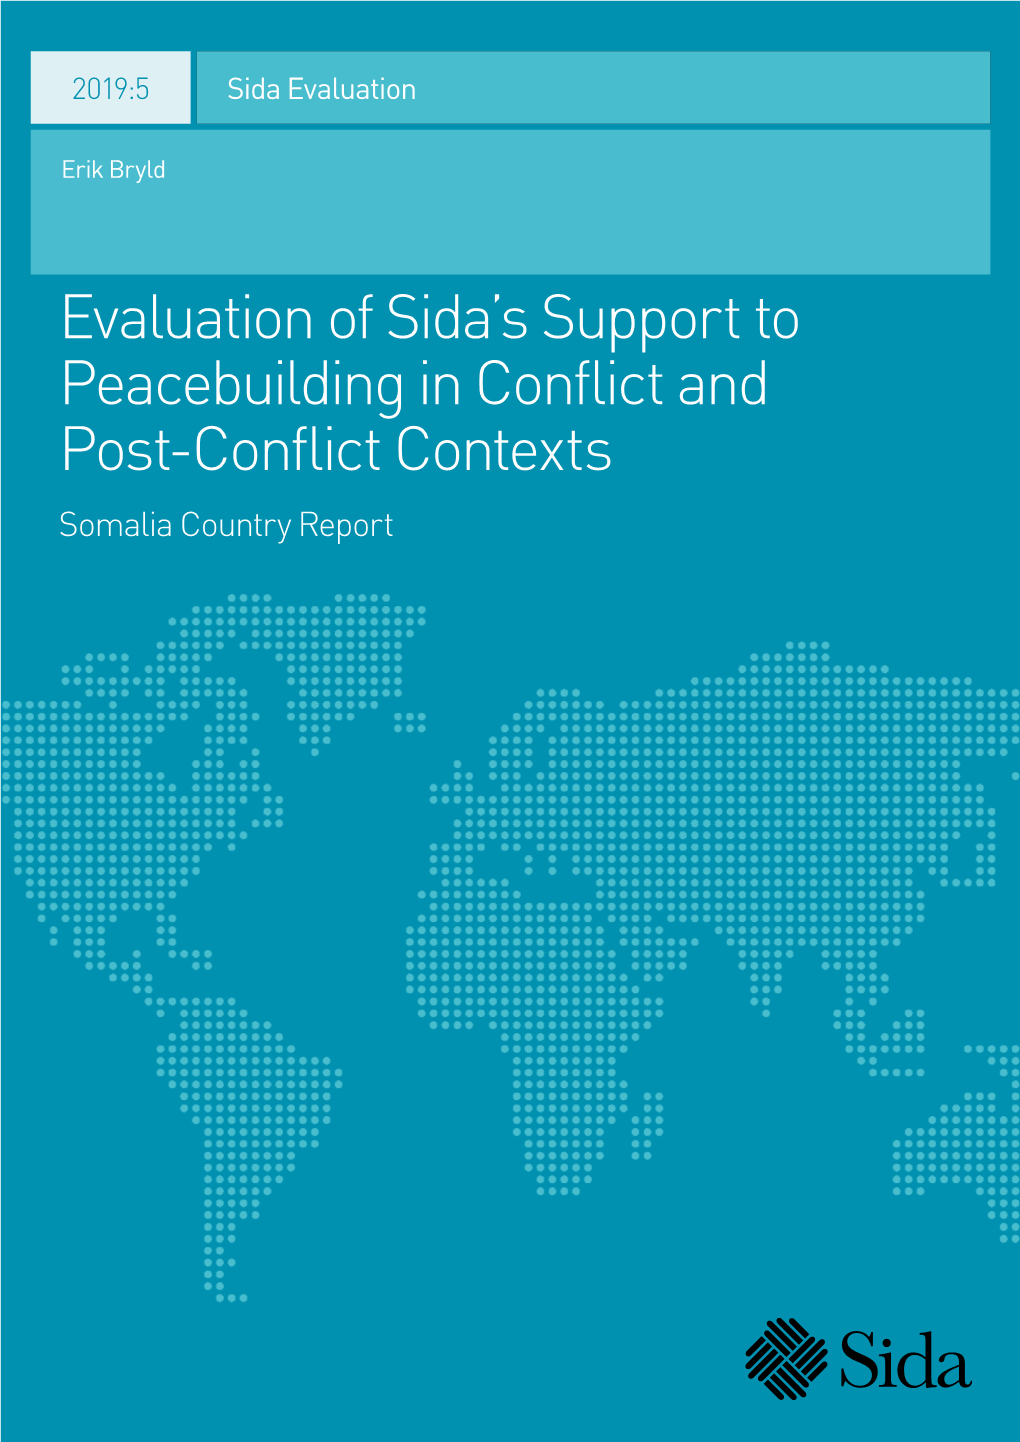 Evaluation of Sida's Support to Peacebuilding in Conflict